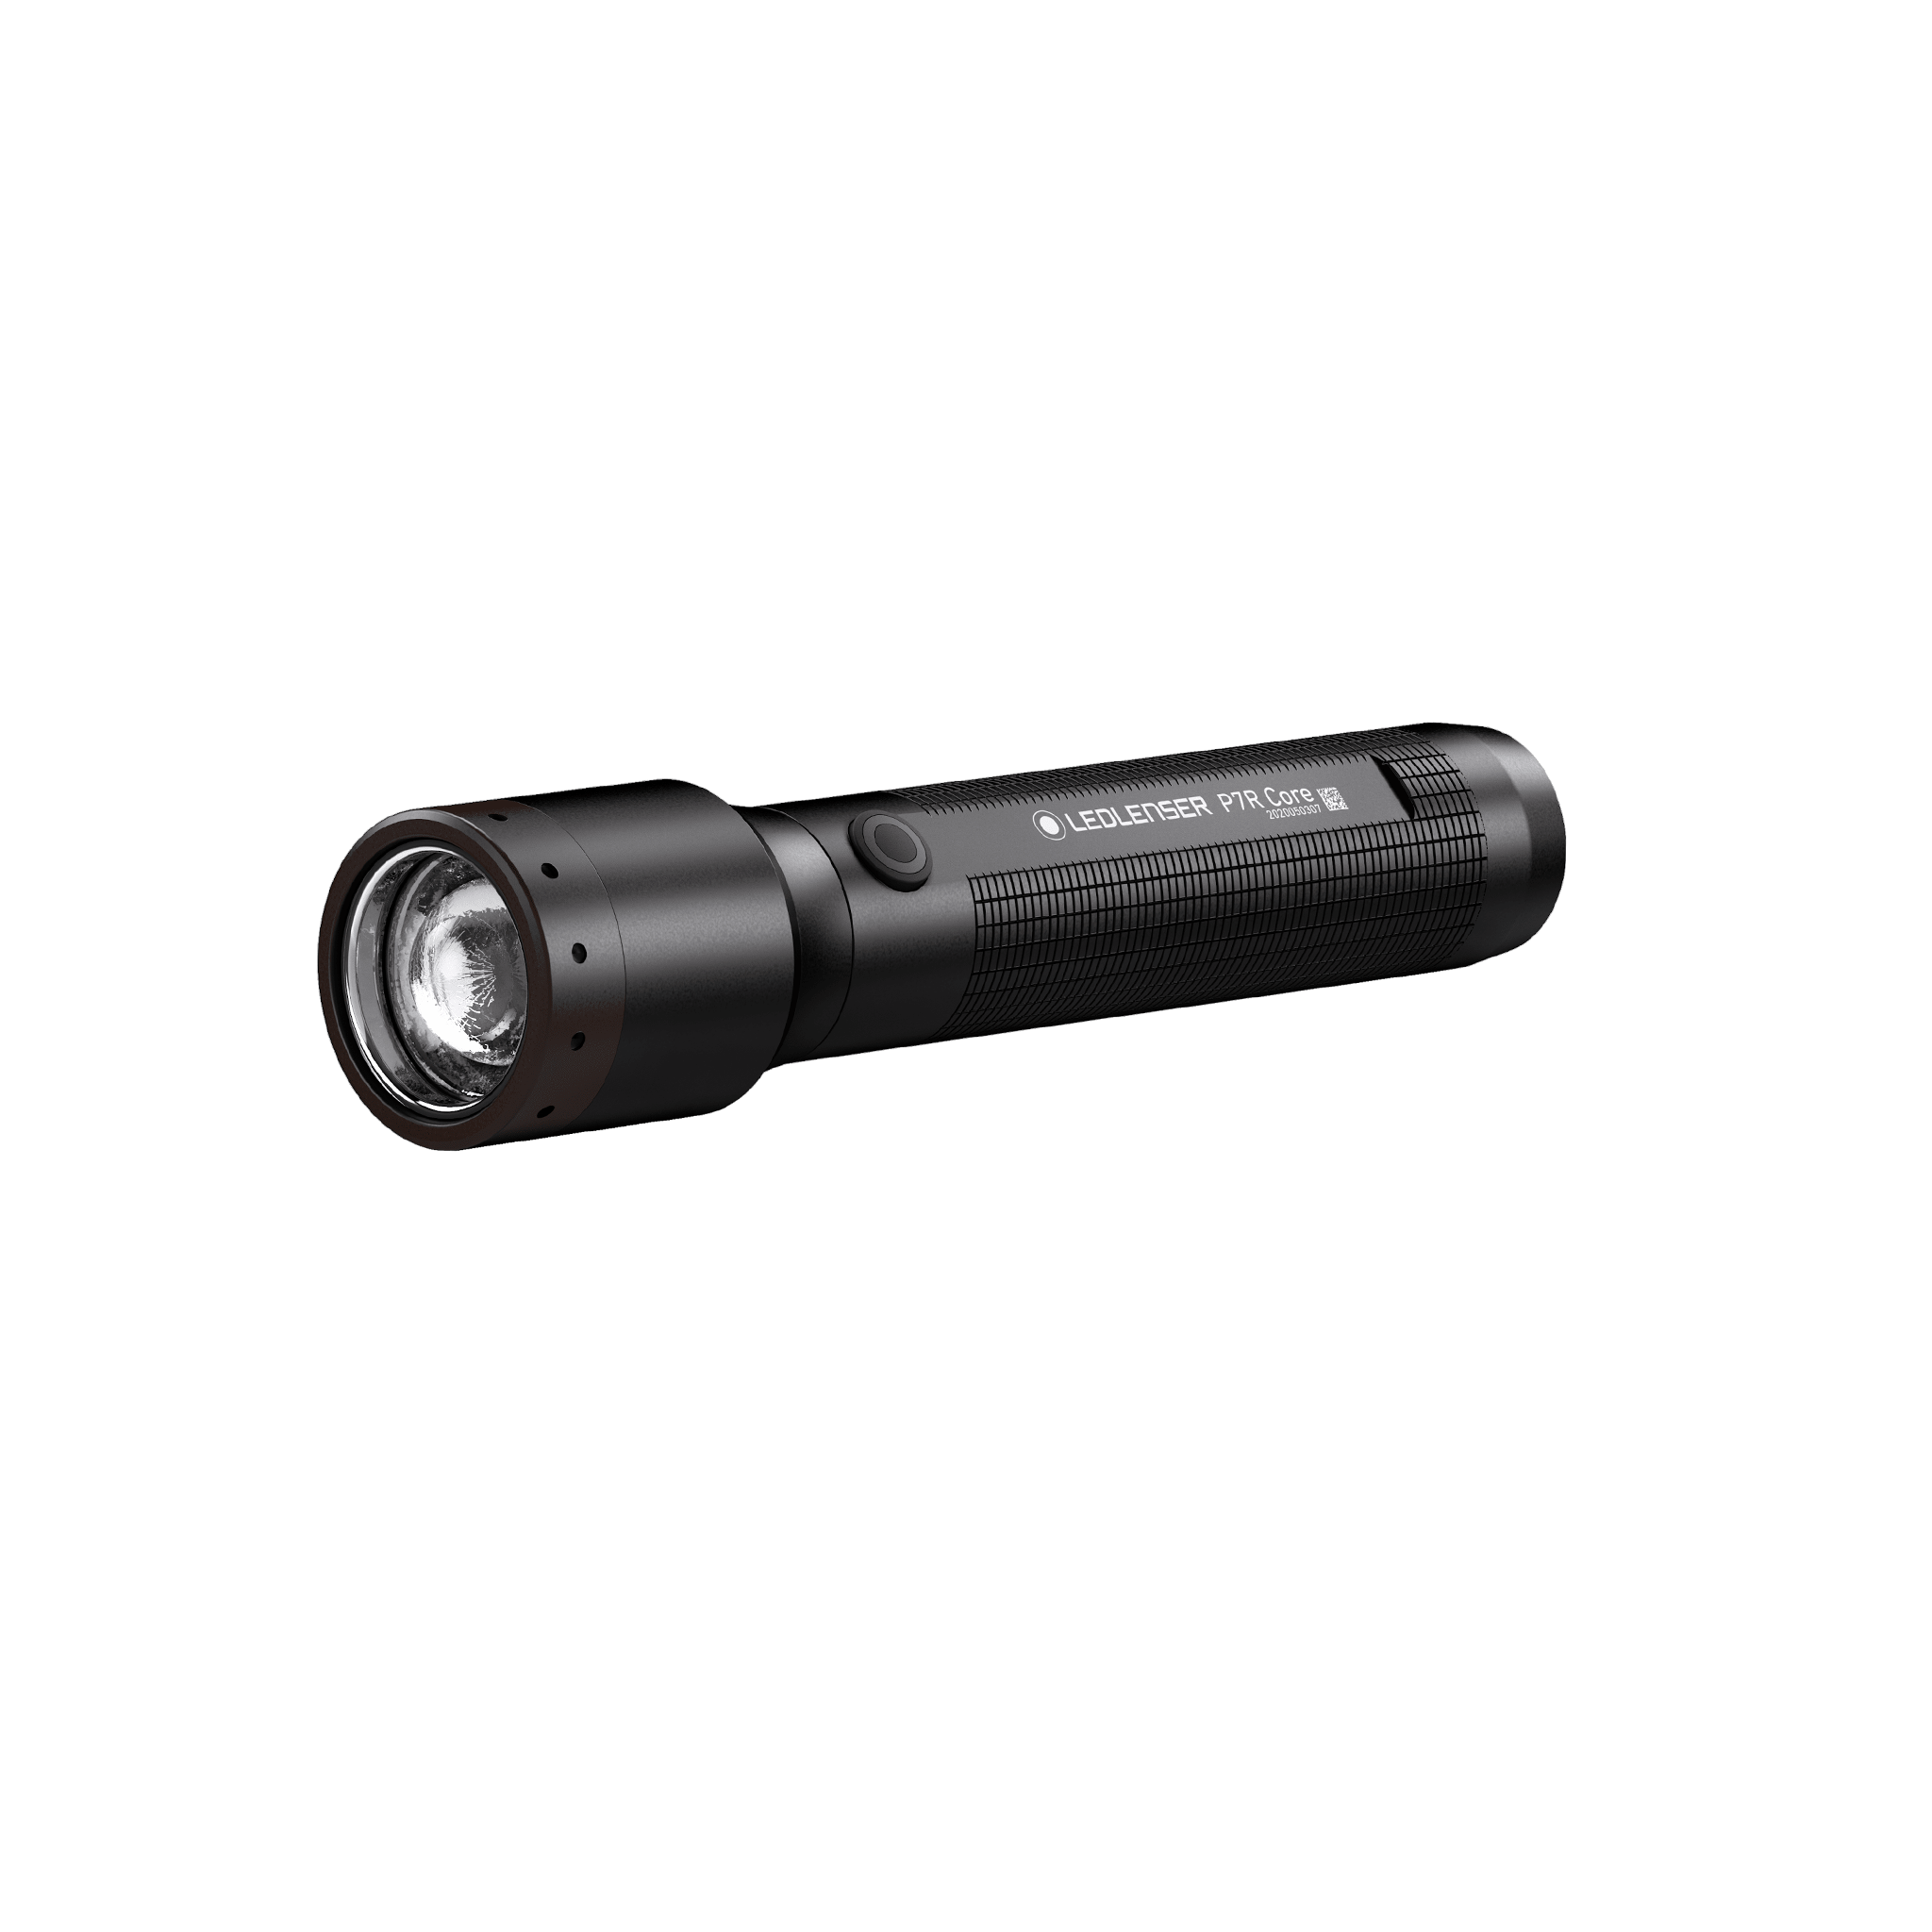 Led Lenser 880003 P7 High-Performance Tactical Flashlight with Speed Focus